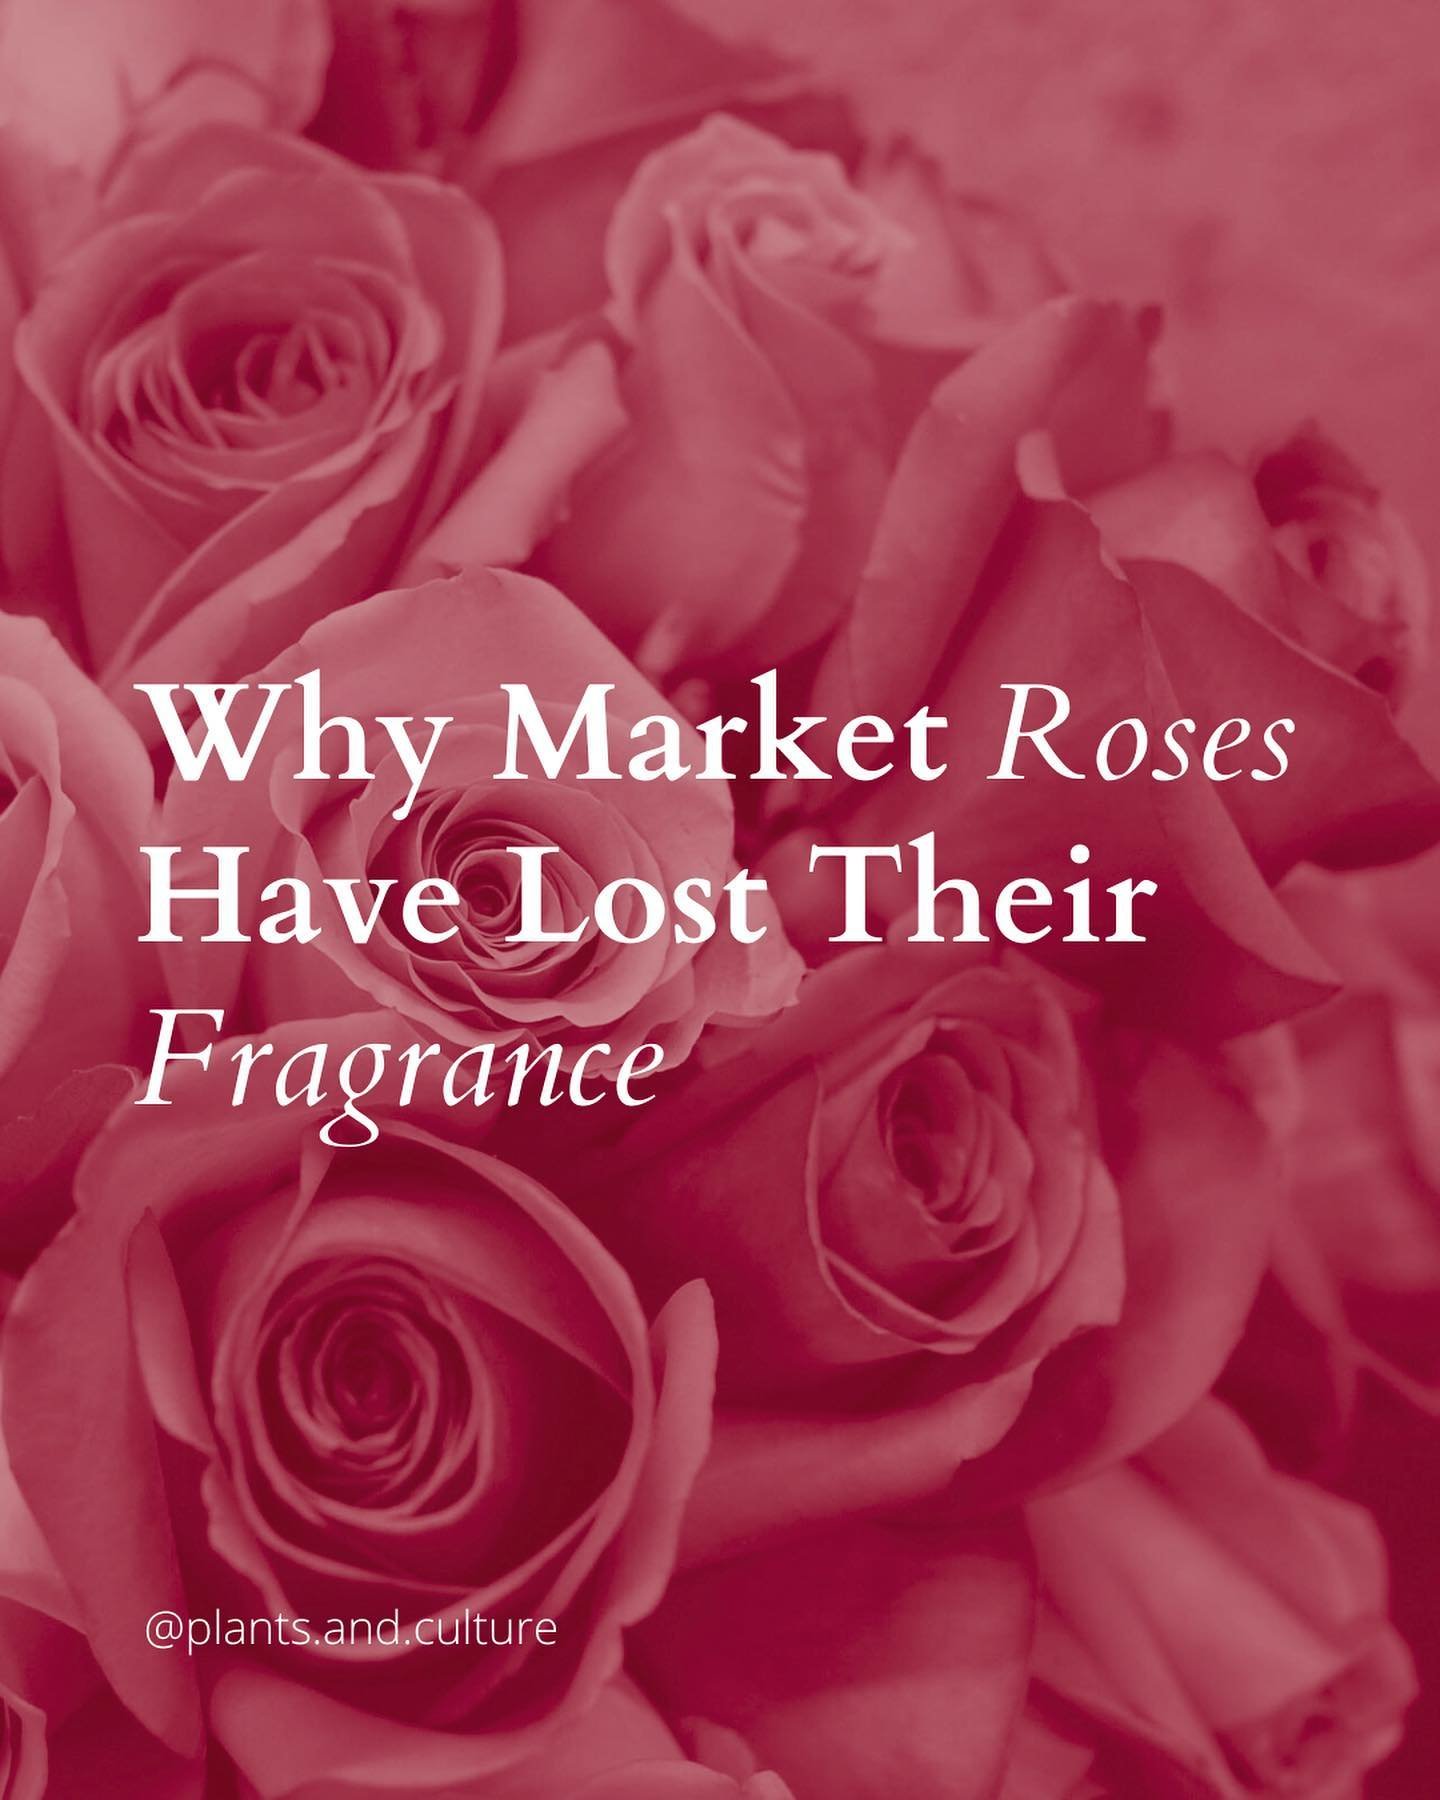 &ldquo;Many people still sniff roses hoping for an aroma; what they likely smell is a combination of chlorophyll and fillers used at flower shops.&ldquo; Today, scientists &ldquo;have begun trying to breed the scent back in, hoping to offer consumers